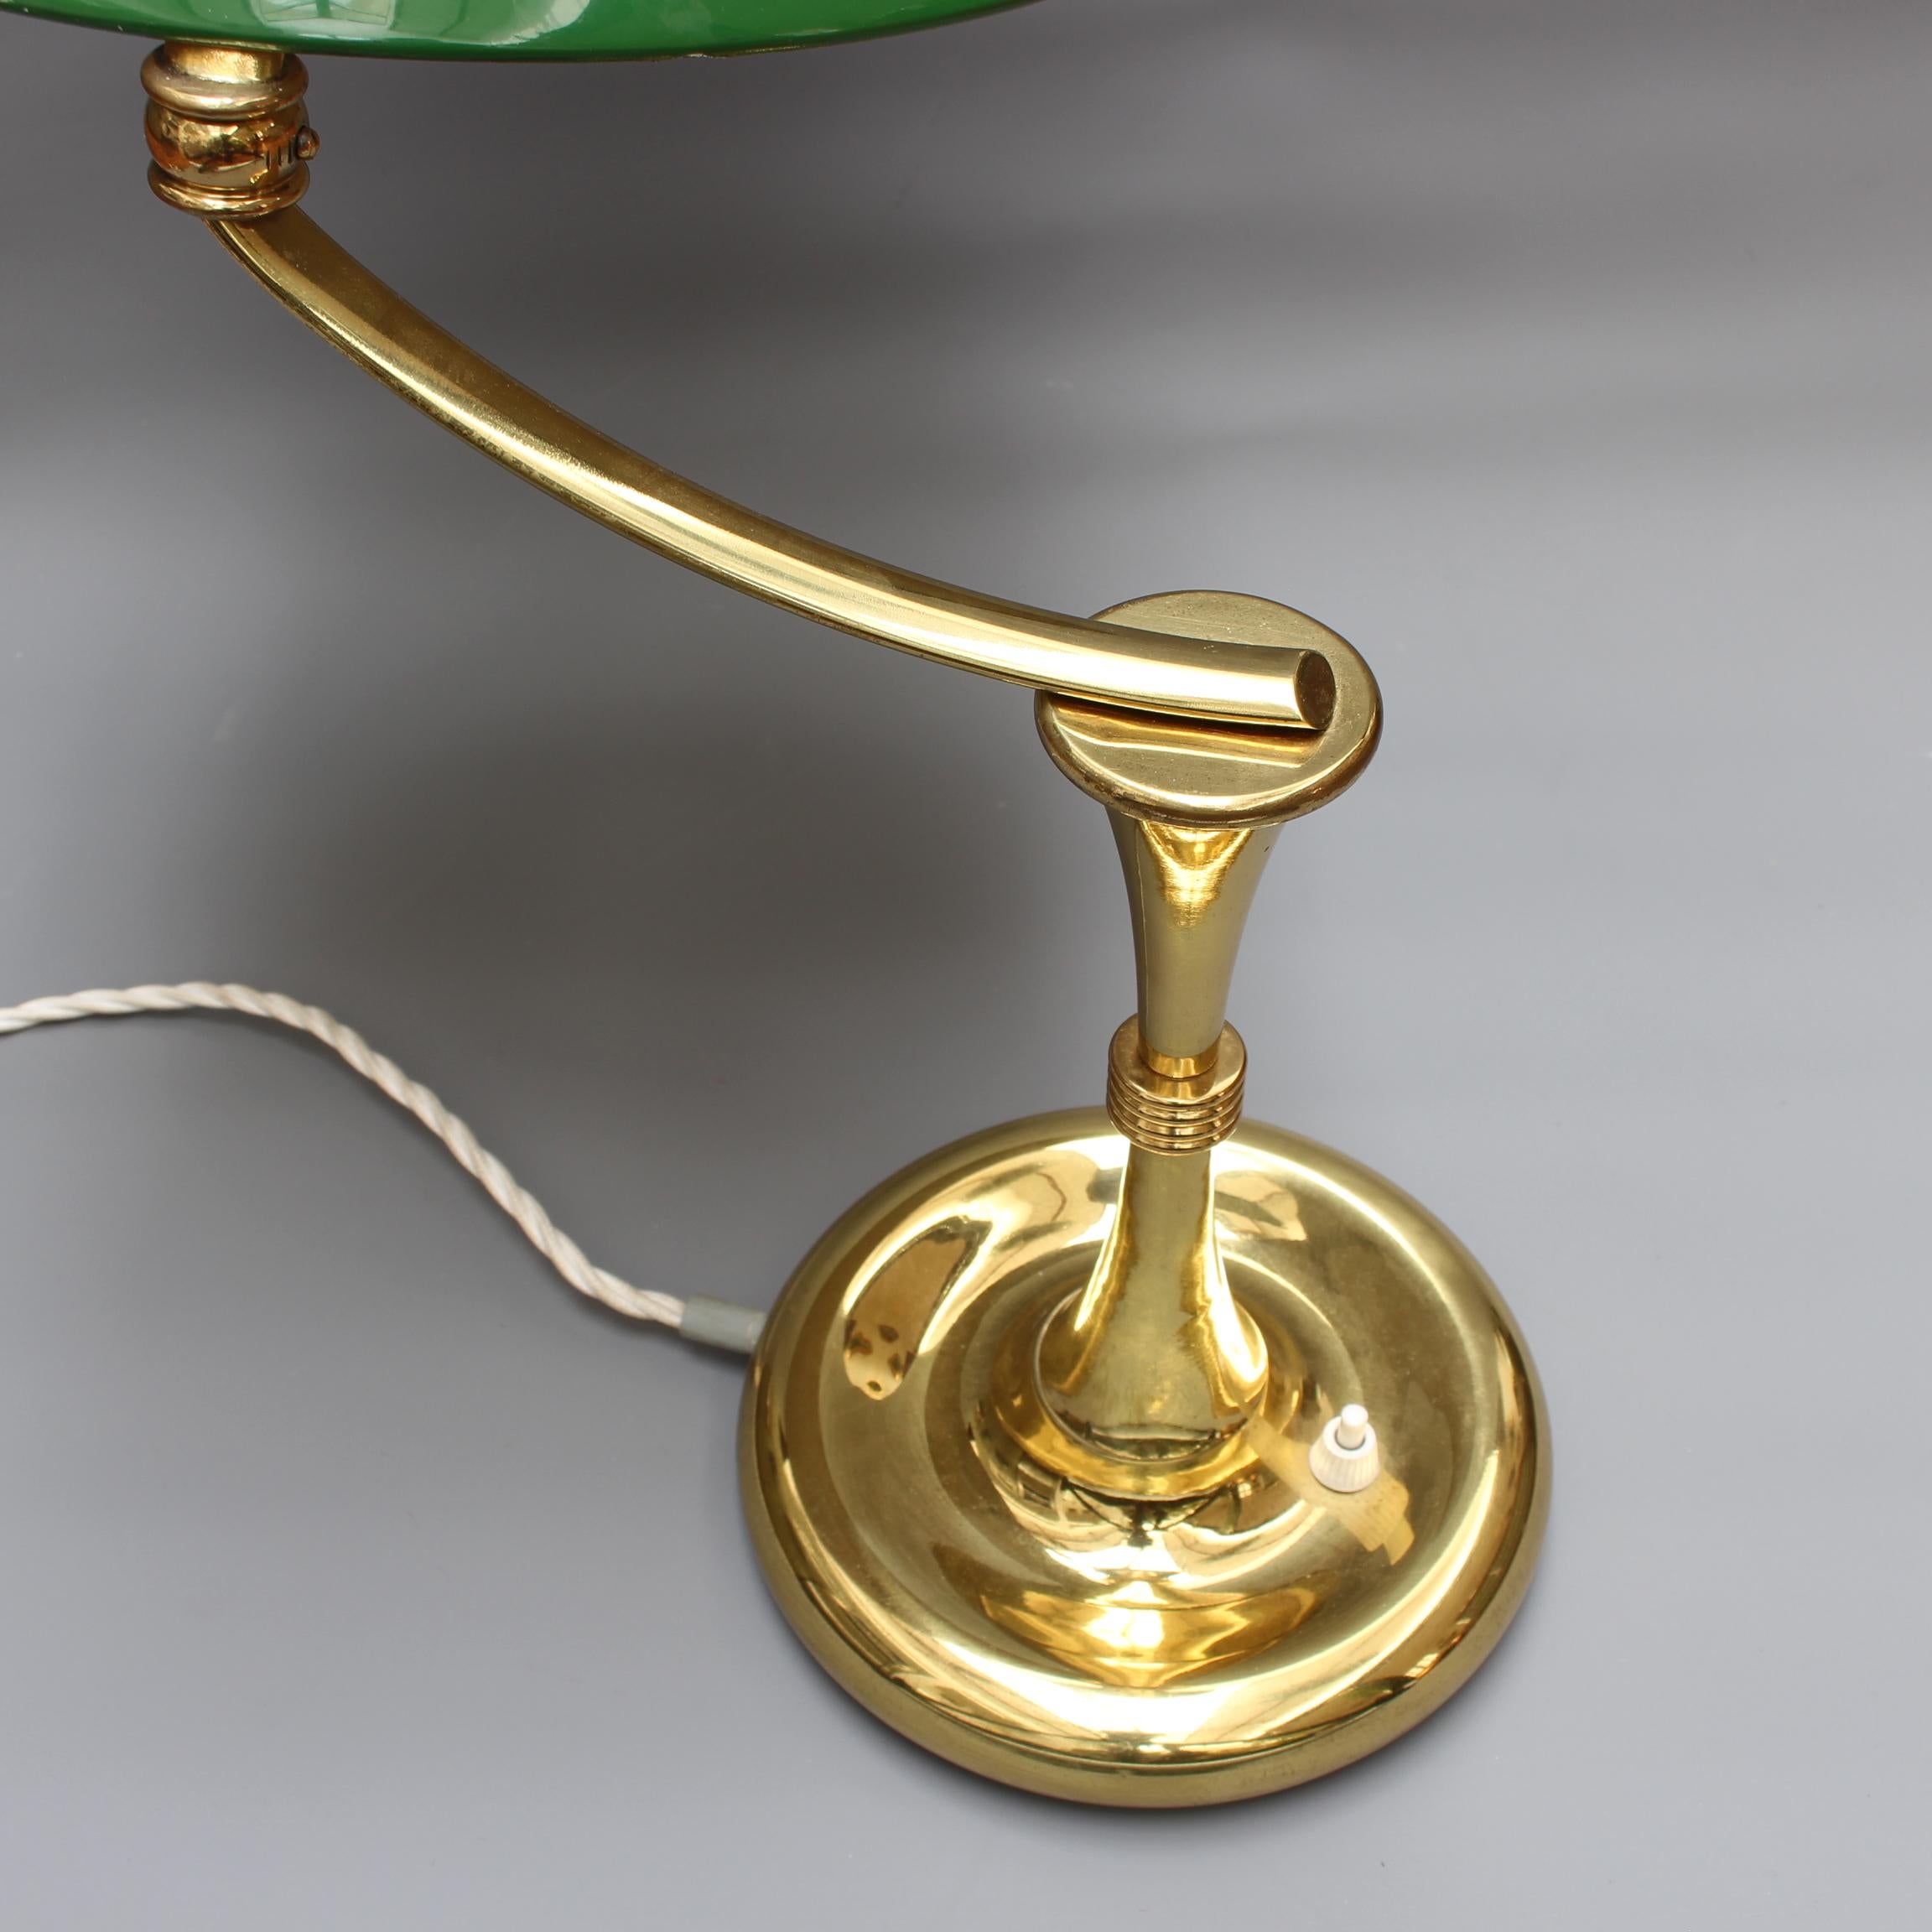 Italian Mid-Century Brass-Covered Desk Lamp with Green Shade 'circa 1950s' For Sale 7